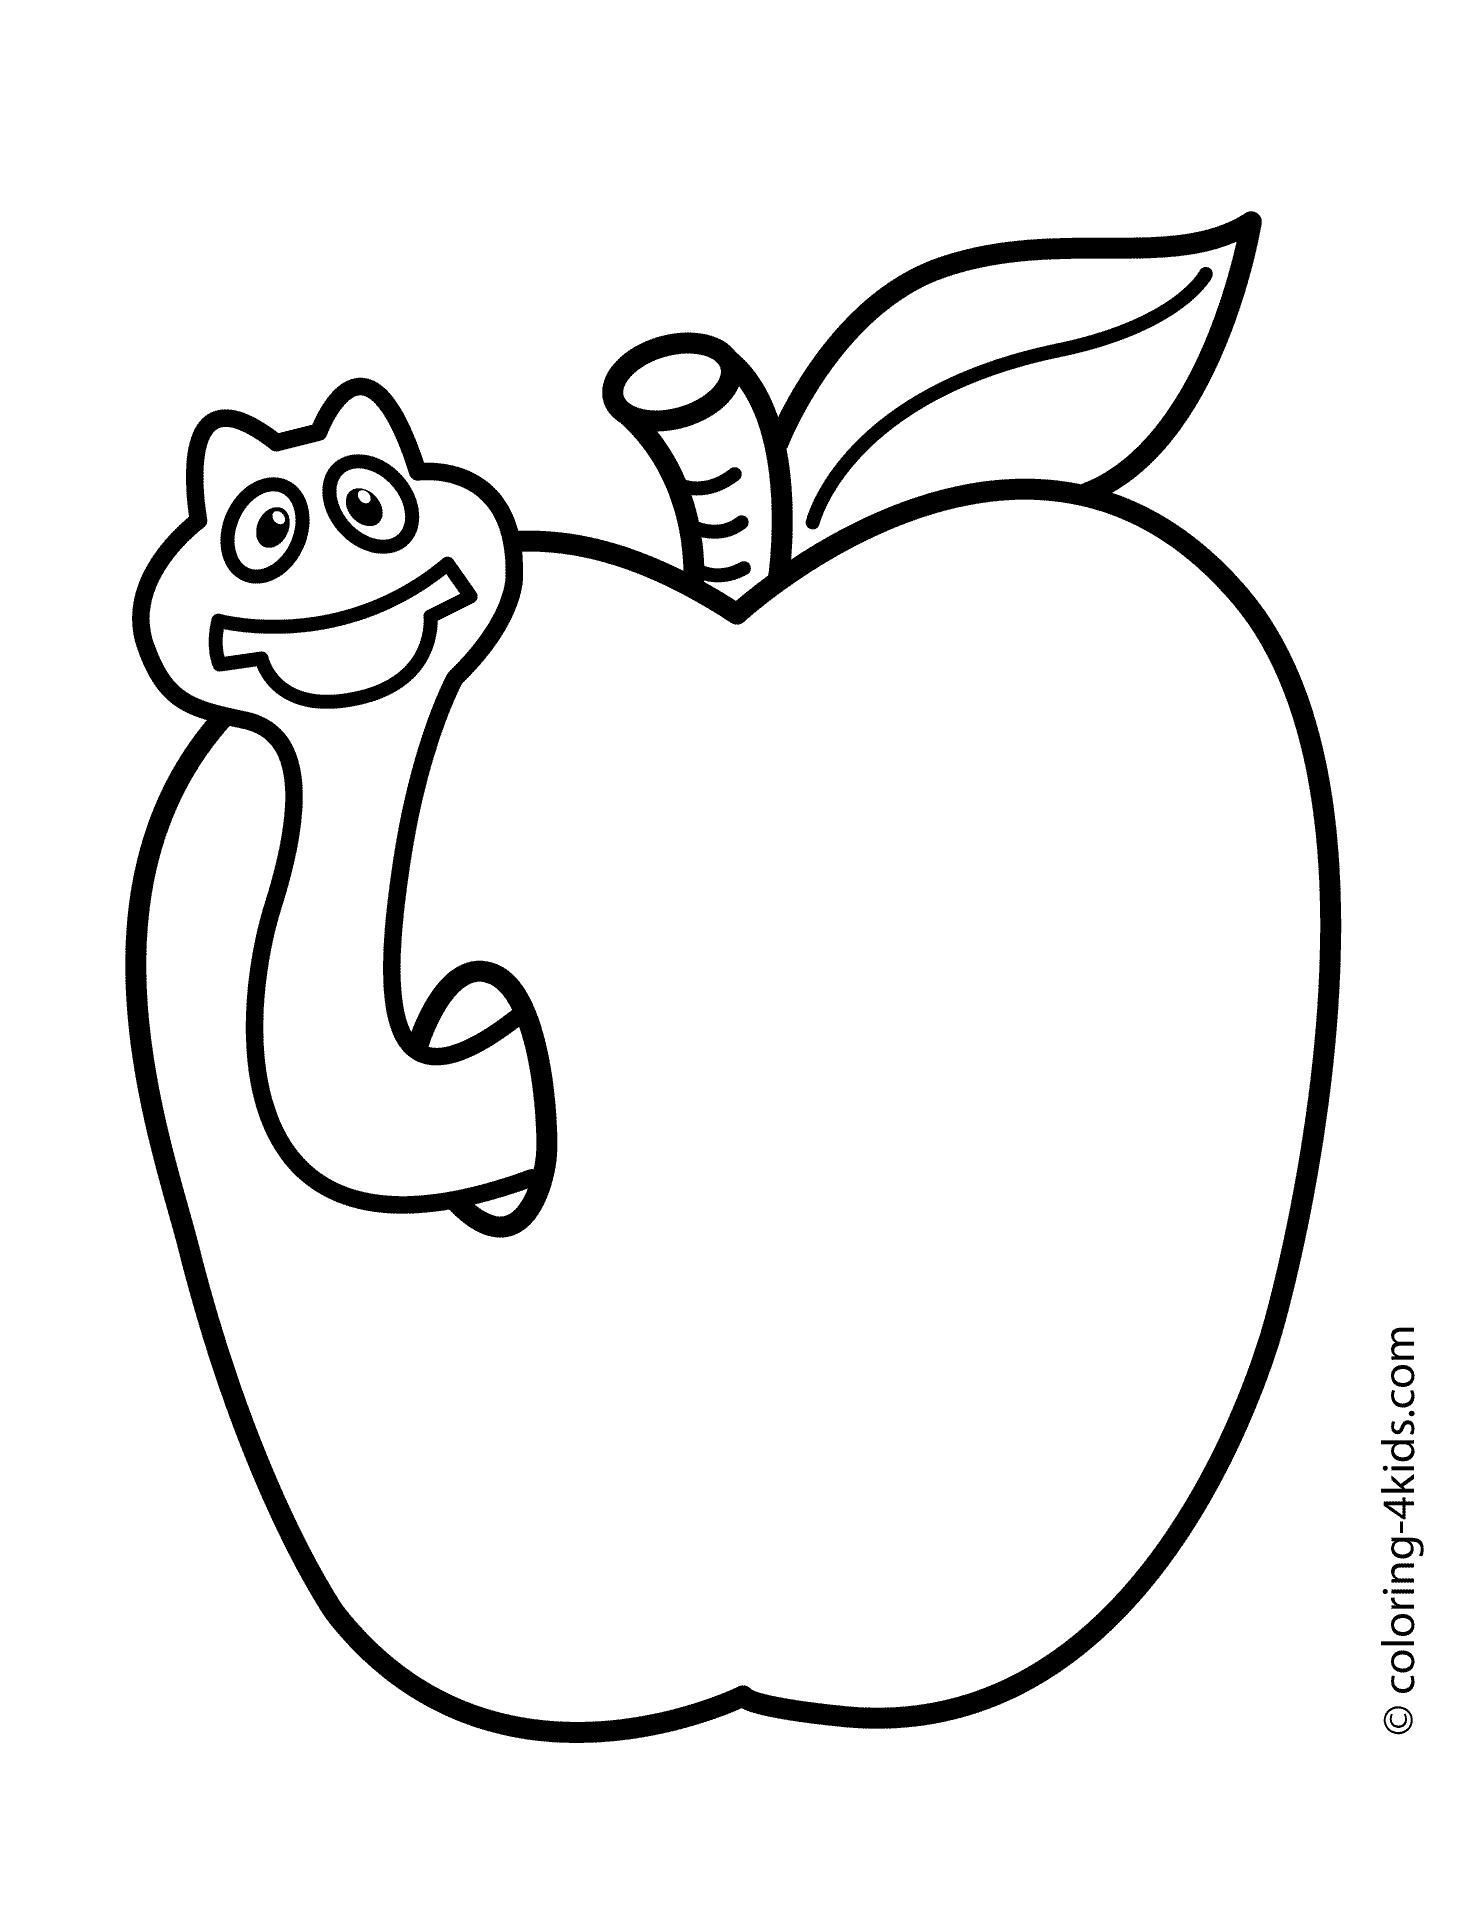 free-year-old-coloring-pages-download-free-year-old-coloring-pages-png-images-free-cliparts-on